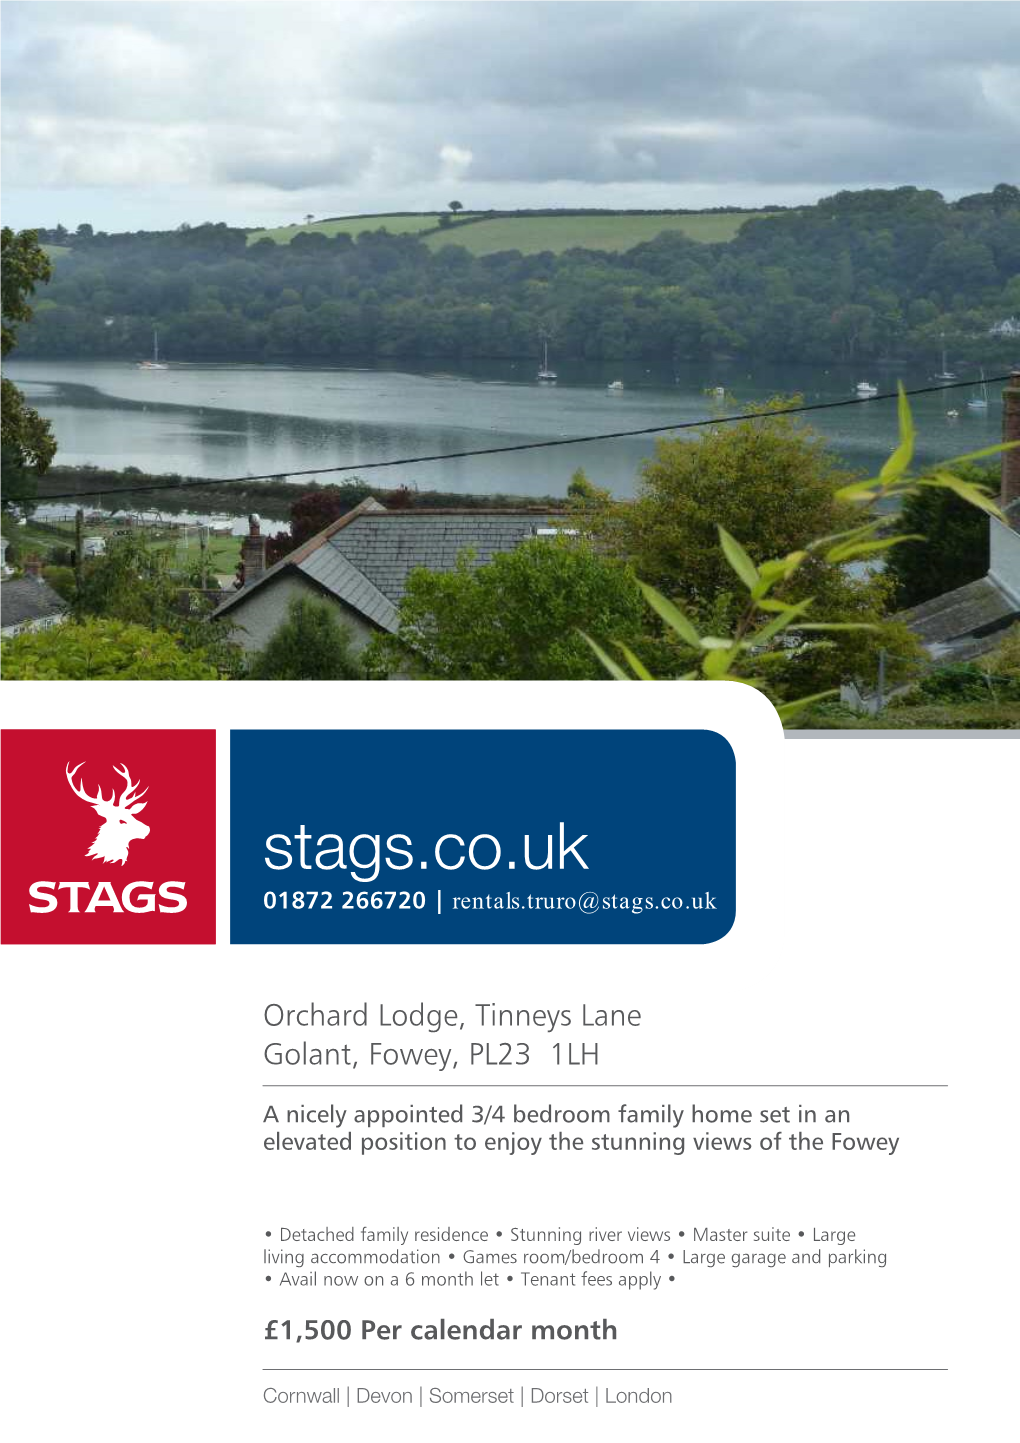 Stags.Co.Uk 01872 266720 | Rentals.Truro@Stags.Co.Uk